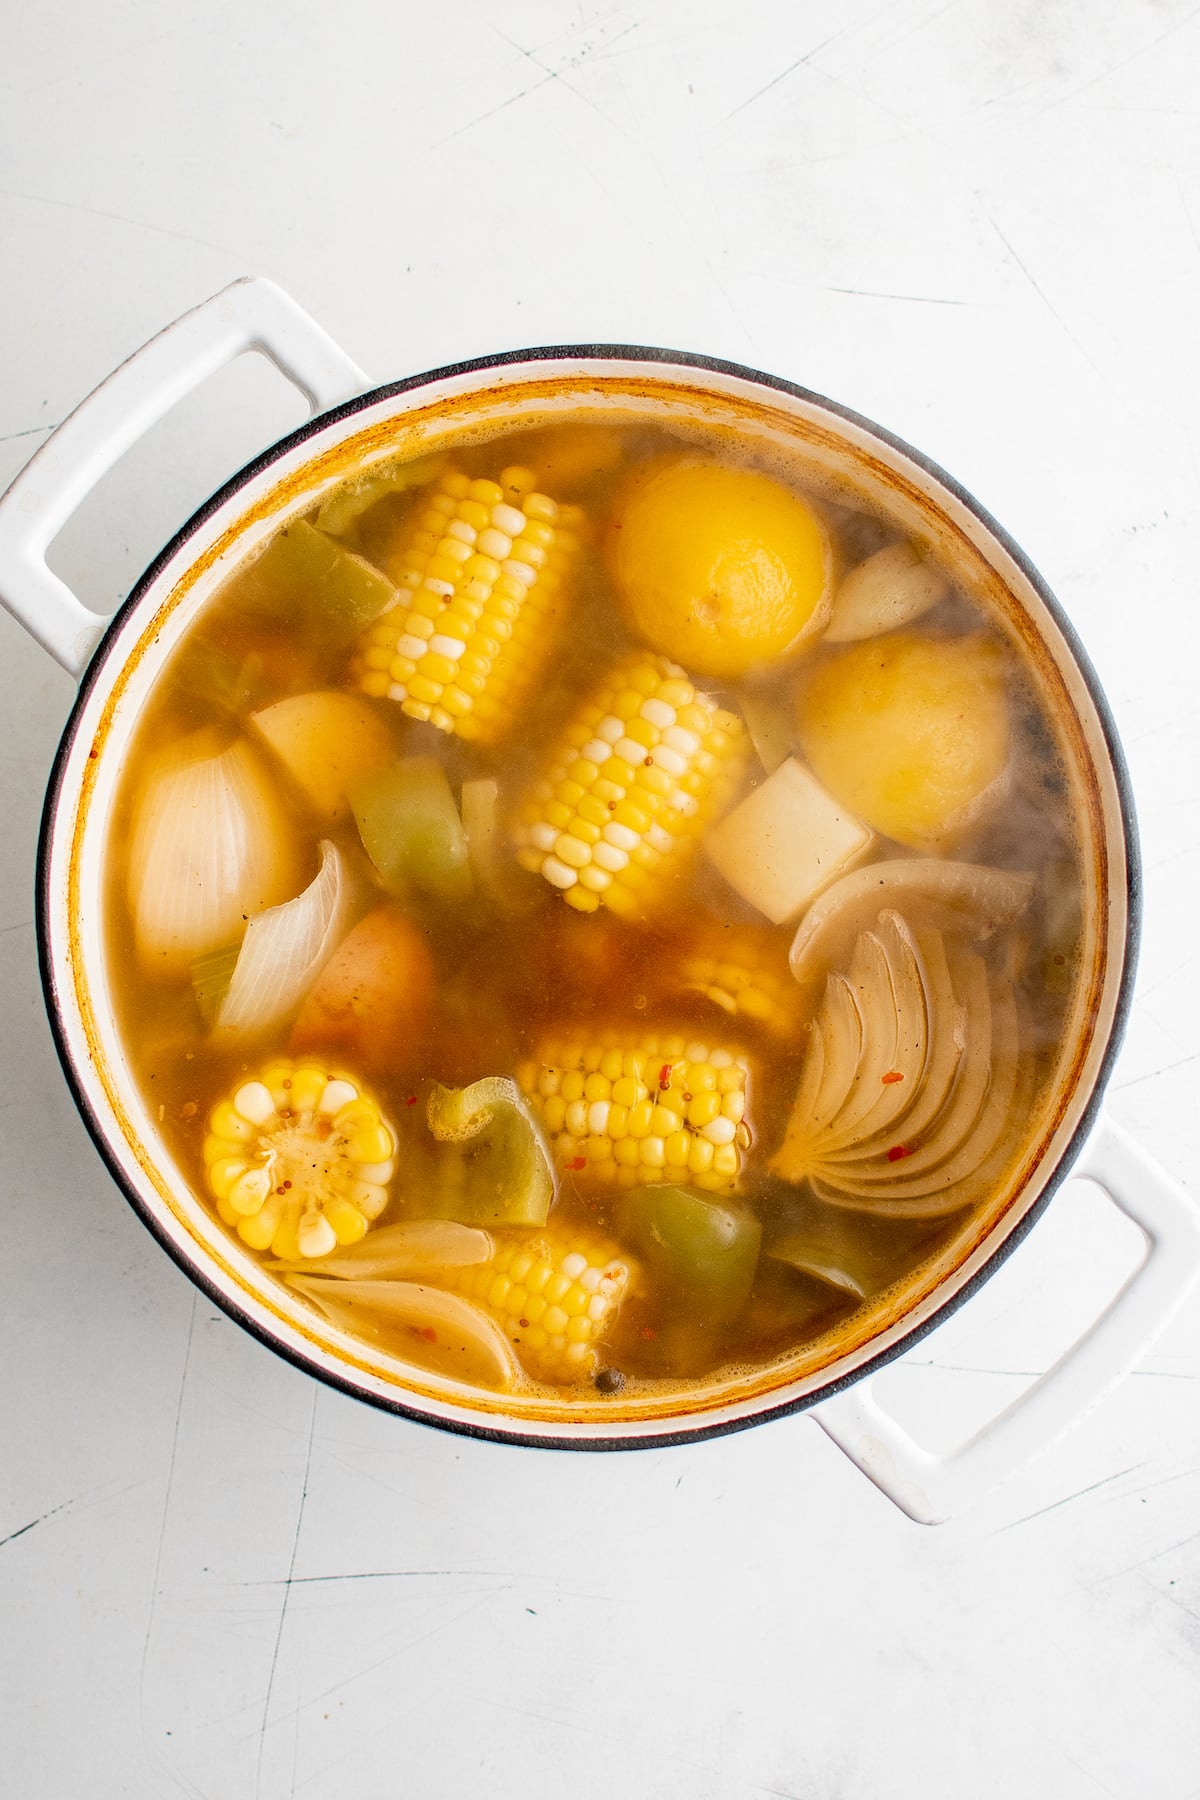 Broth and vegetables in a white pot.